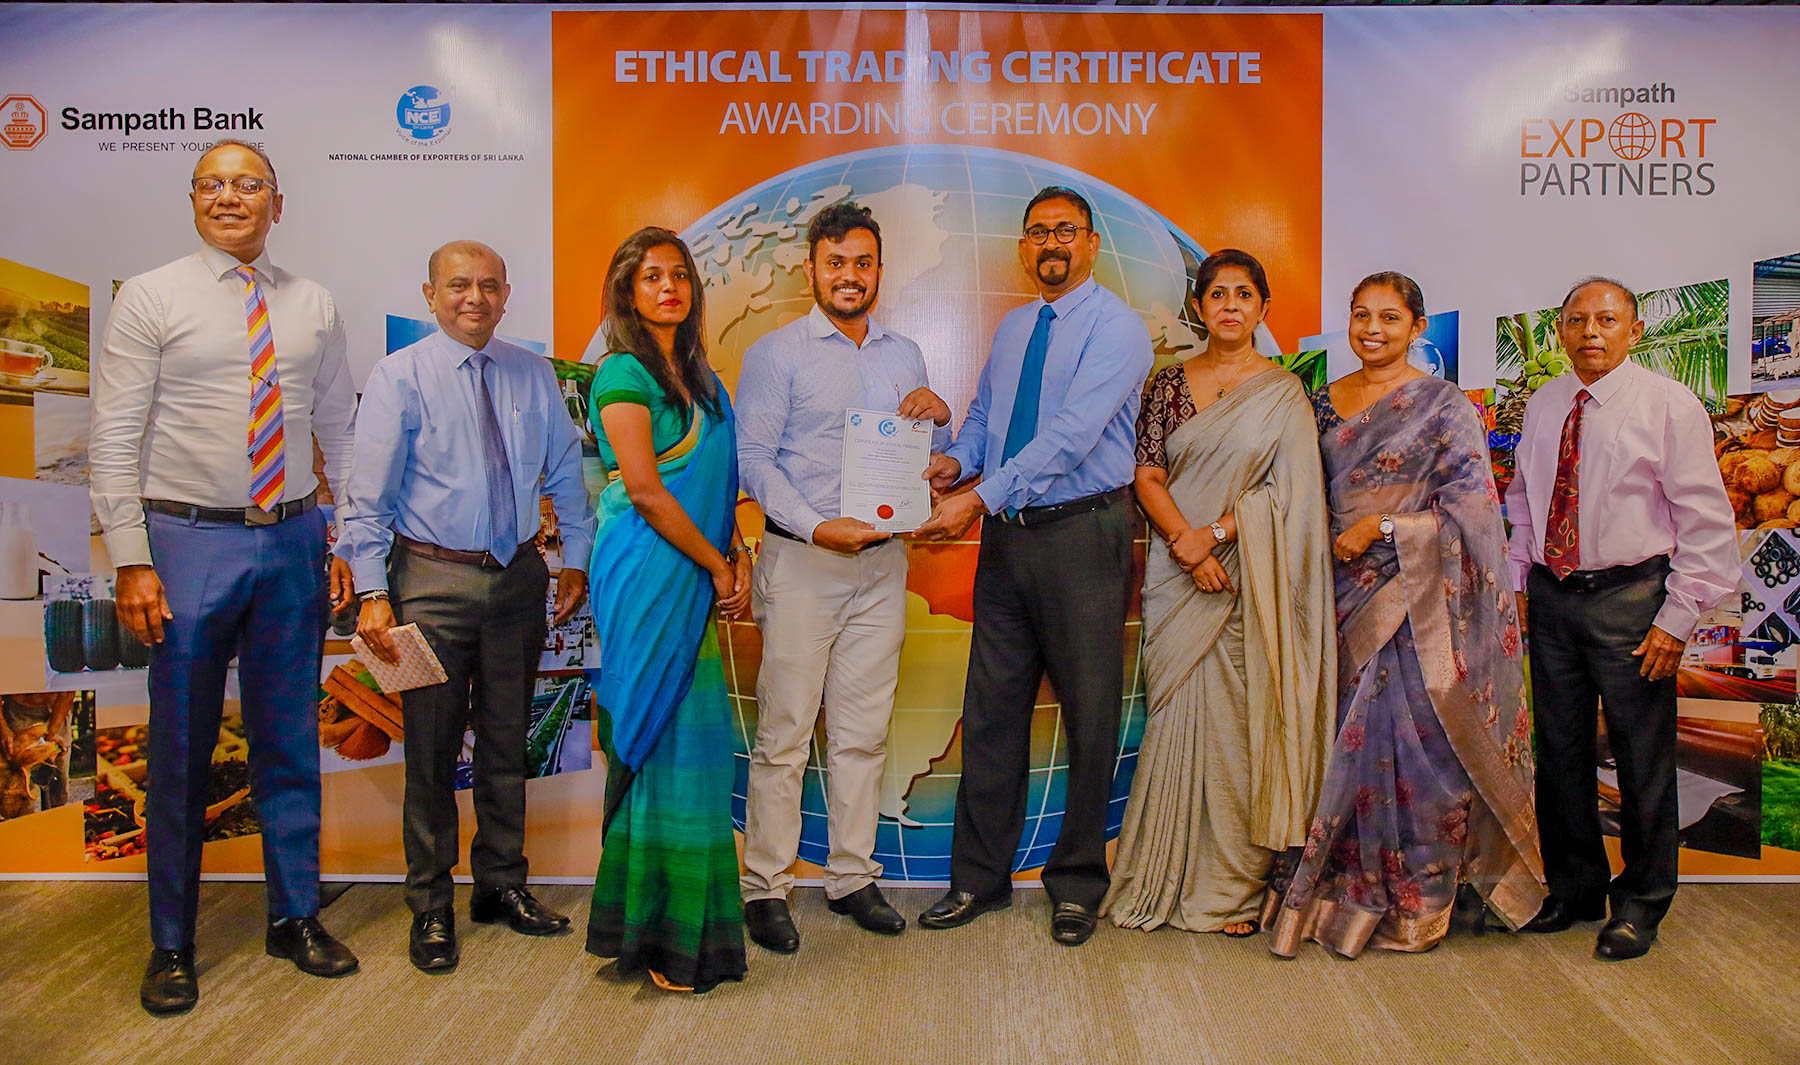 RECEIVING OF THE CERTIFICATE OF ETHICAL TRADING